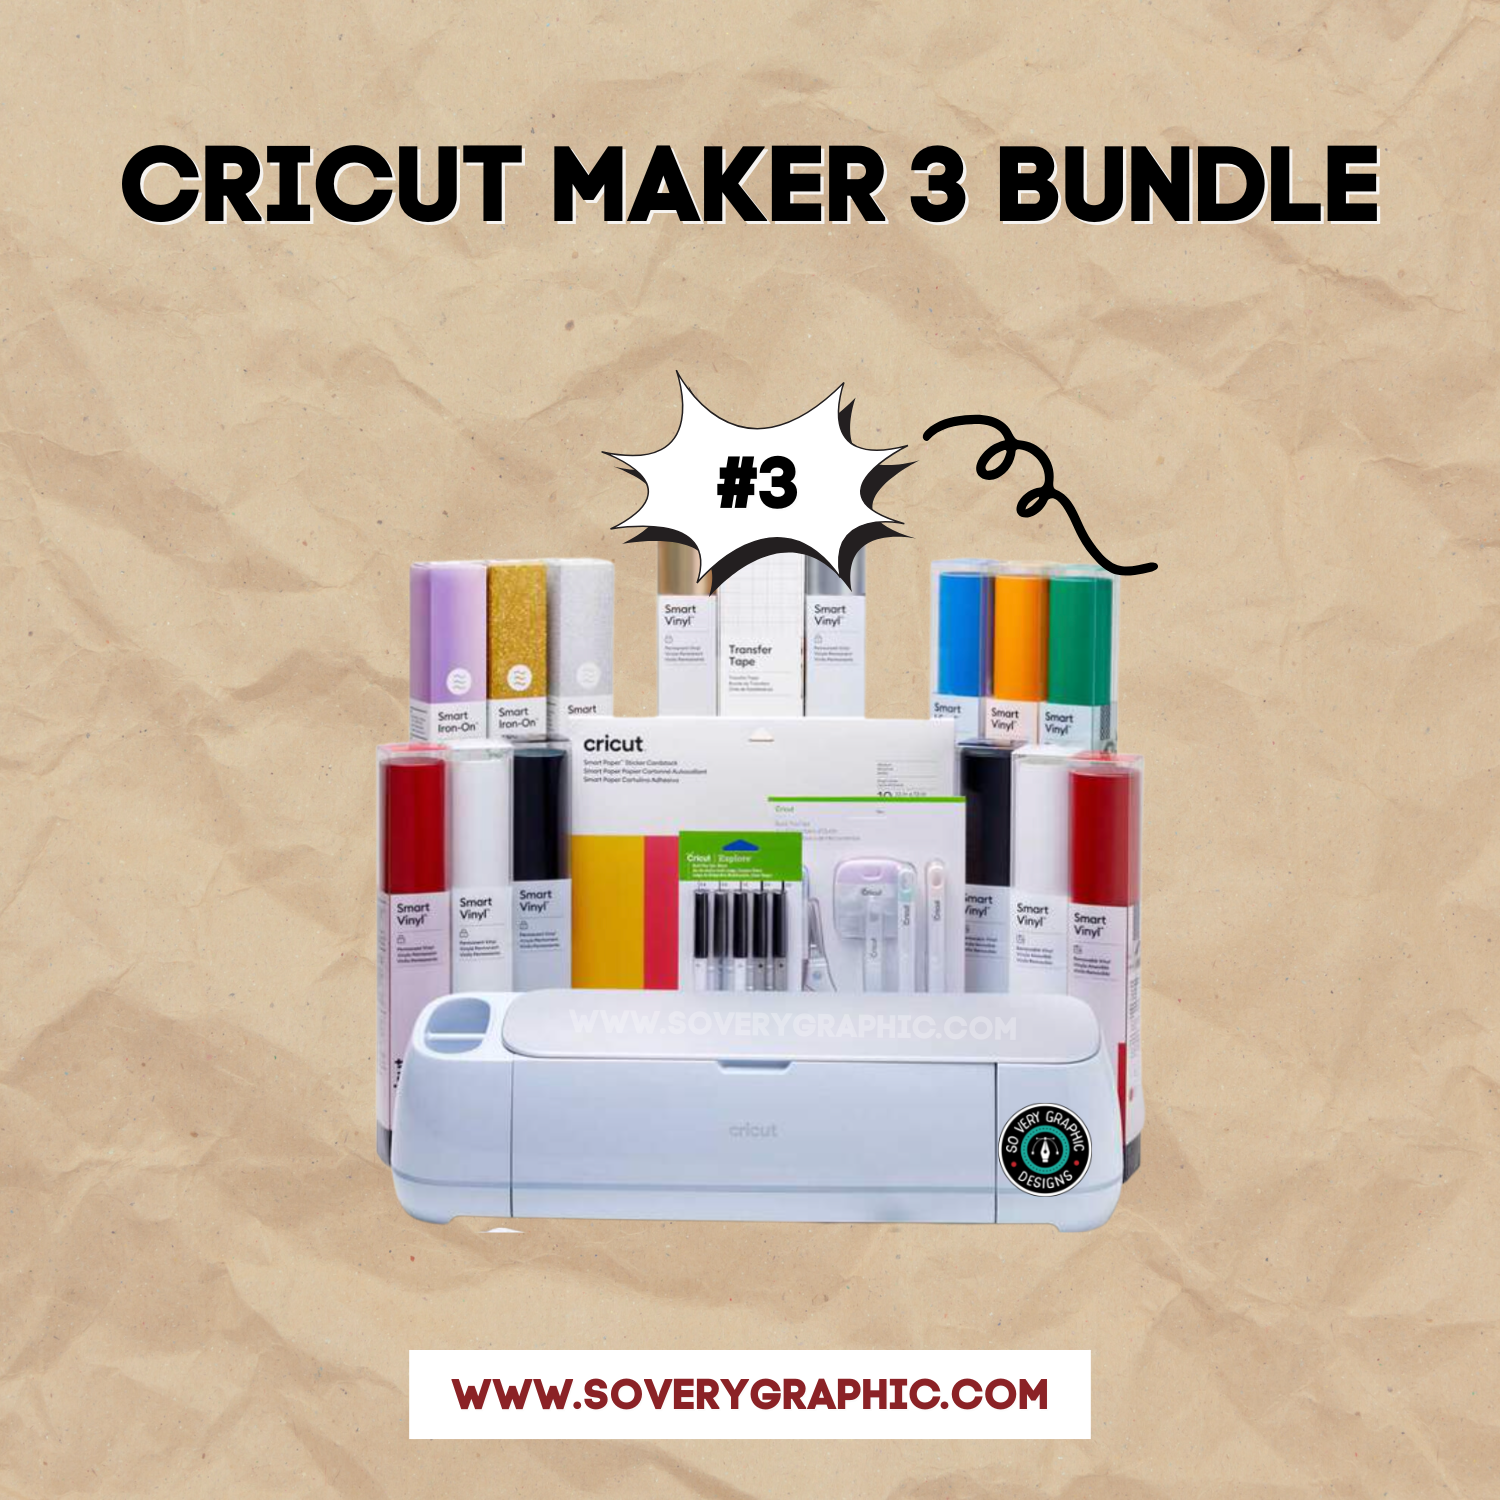 Cricut Maker 3 Bundle The Ultimate Gift Guide for Creatives from So Very Graphic